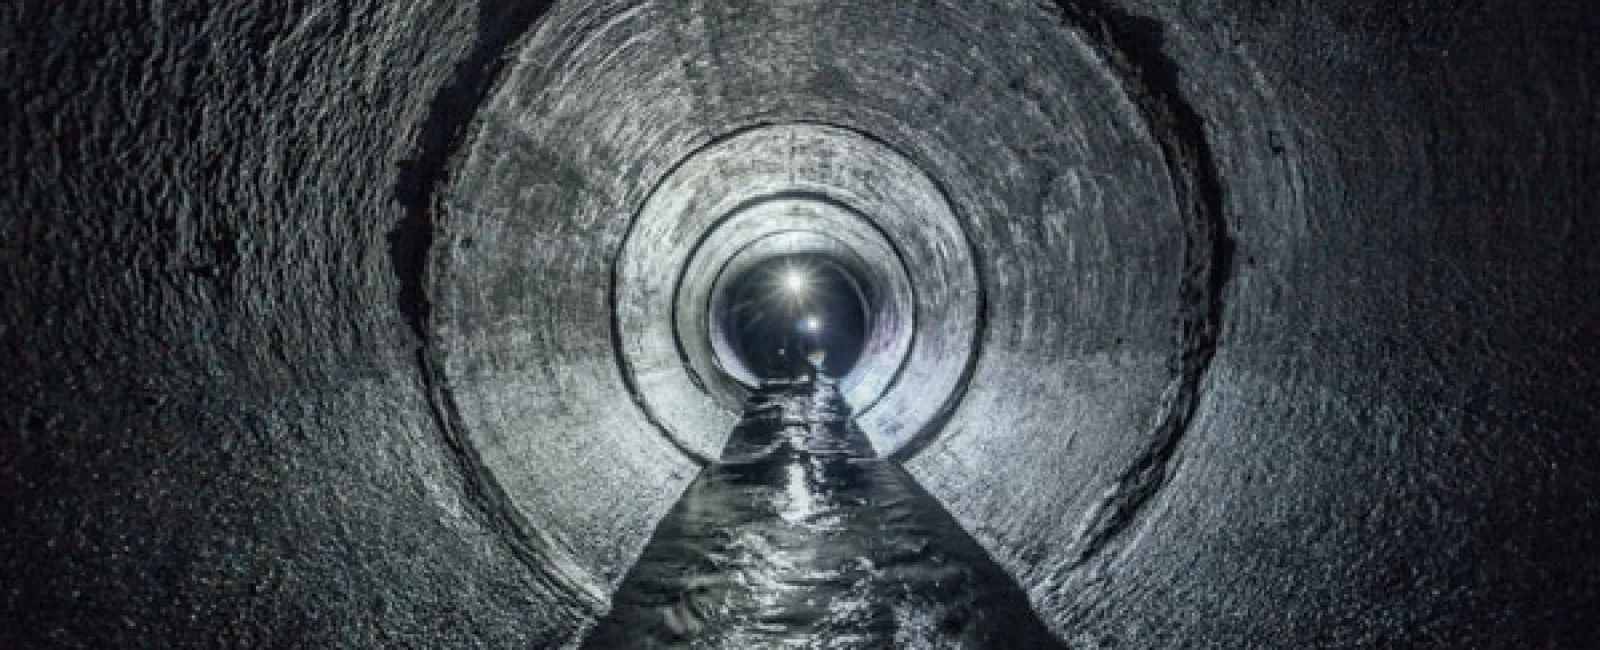 5 SIGNS YOU NEED A SEWER LINE CLEANING